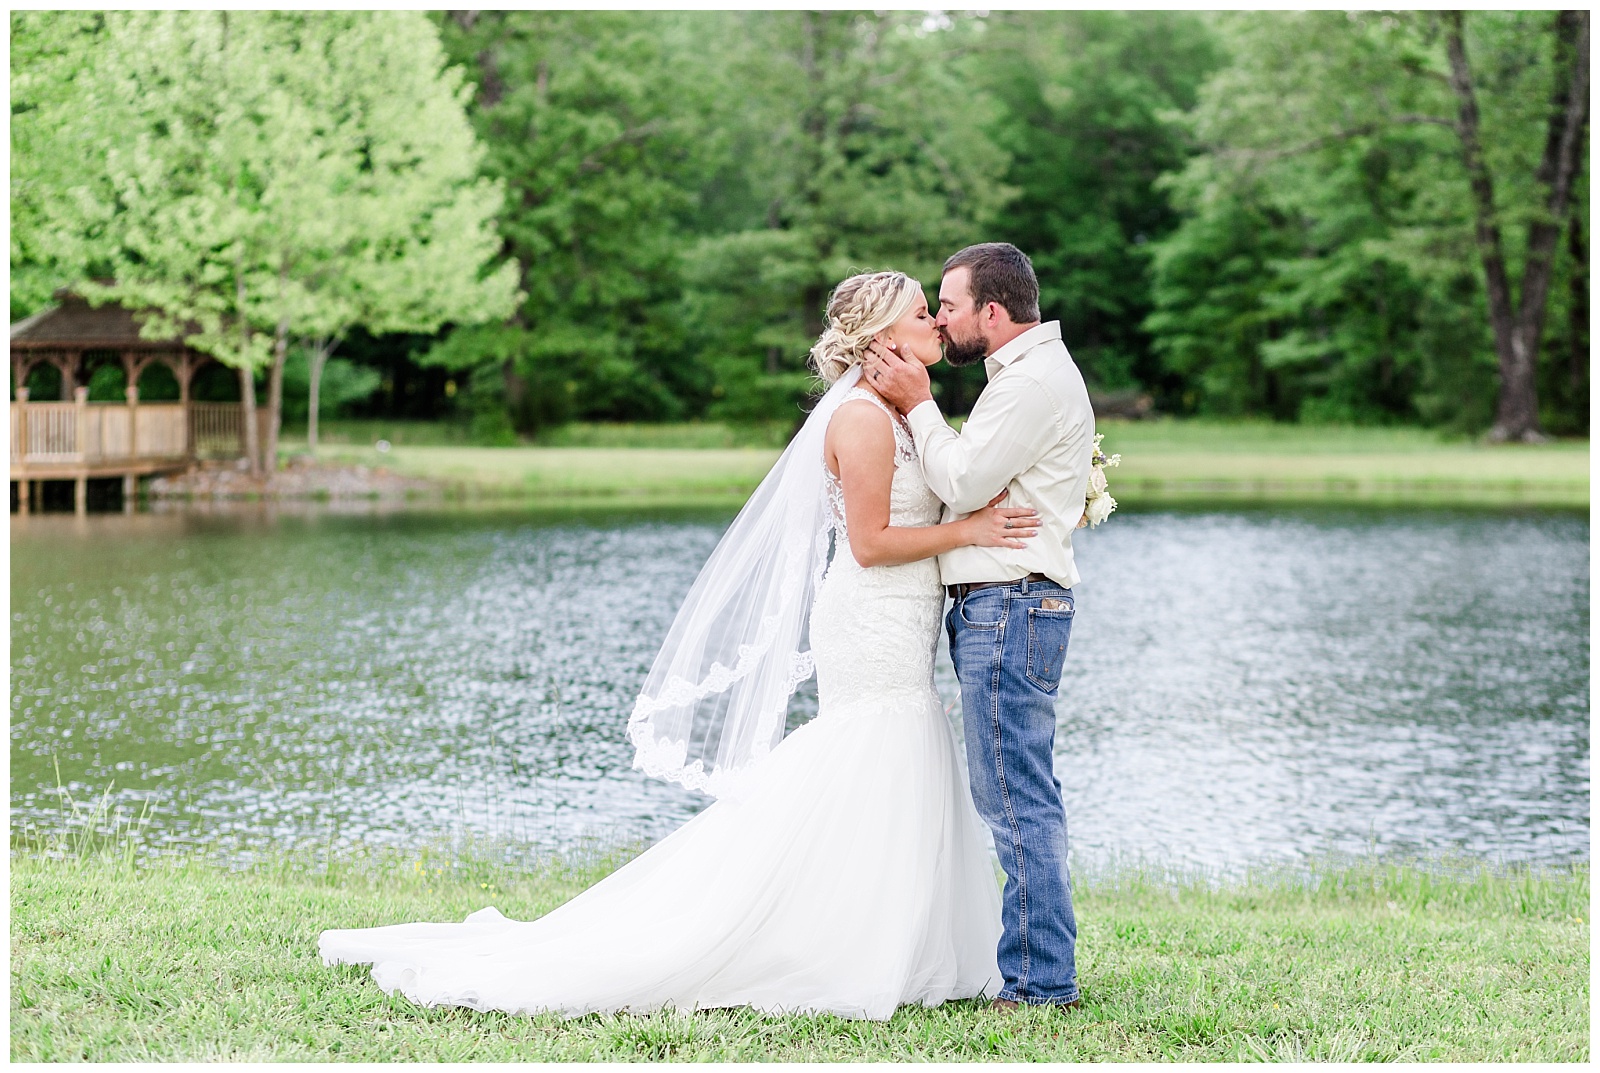 Southern alabama Bride and groom portrait for country wedding with purple and gold details and mermaid wedding dress